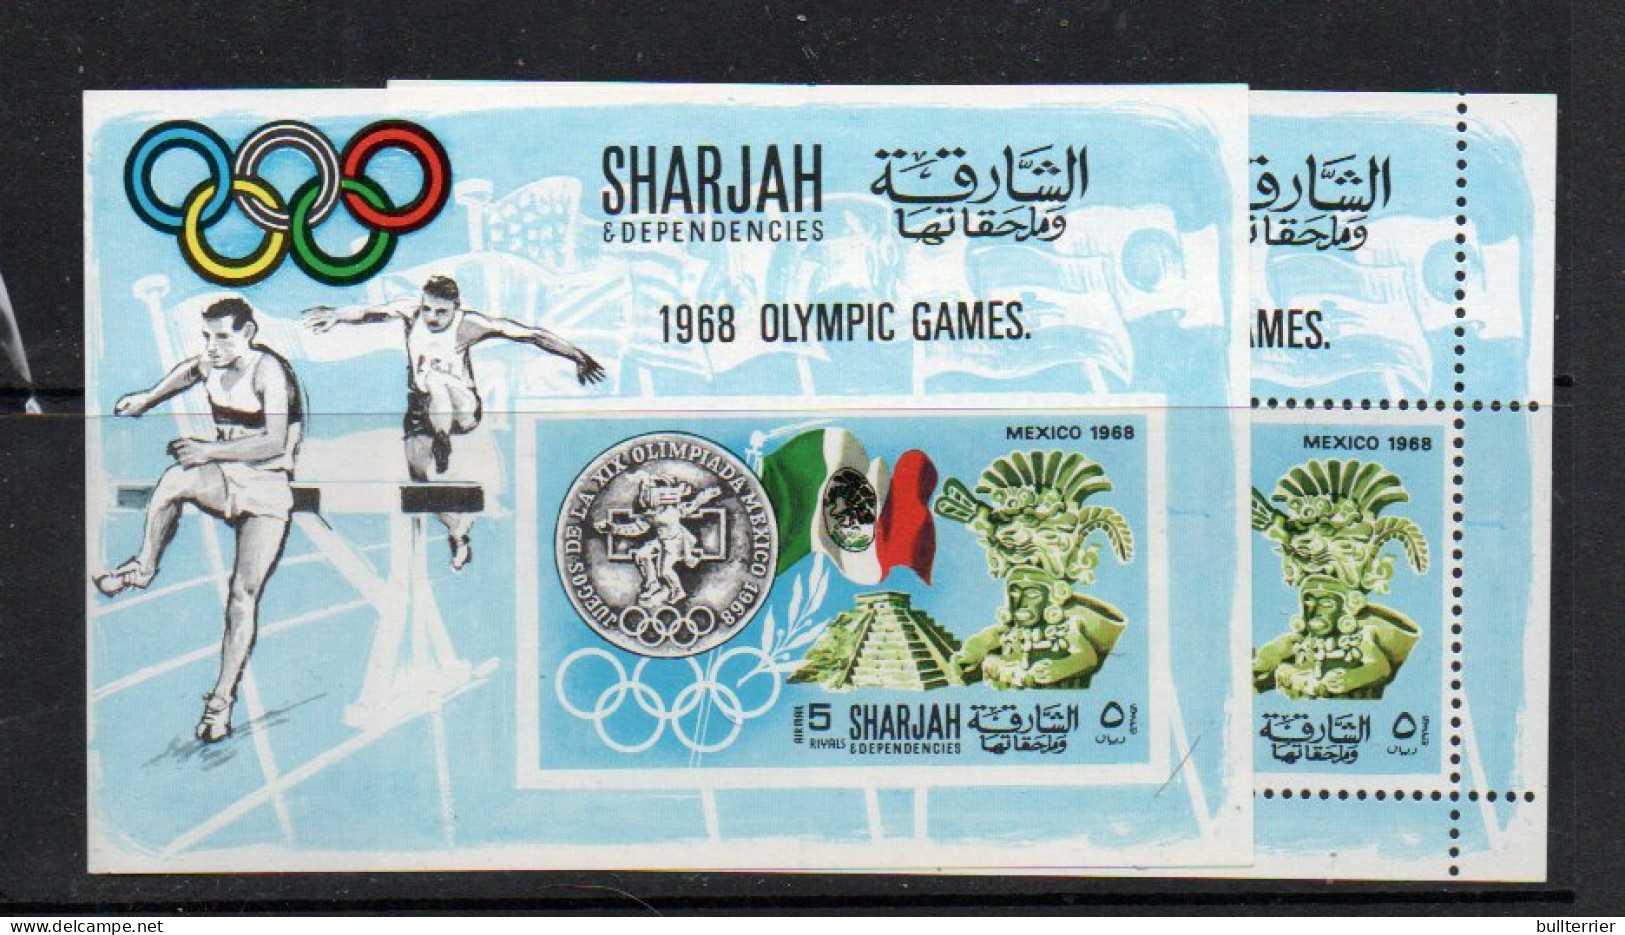 OLYMPICS -SHARJAH - 1968 -MEXICO  OLYMPICS HISTORY  PERF & IMPERF (micB41A&B) MINT NEVRE HINGED,  - Sommer 1968: Mexico